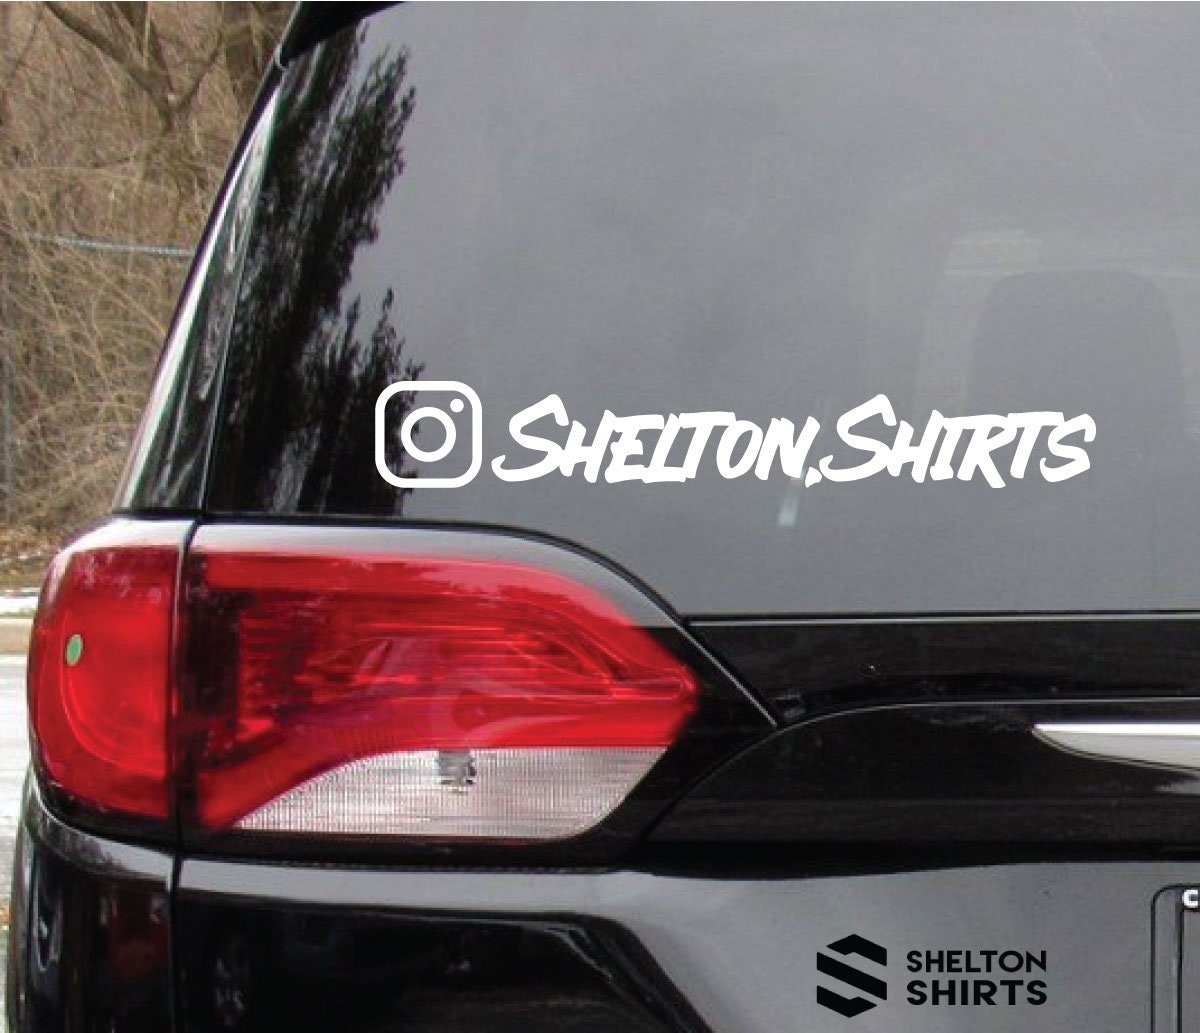 Instagram Logo and Username Vinyl Car Decal Sticker - About 10 x 2 Inc –  SheltonShirts